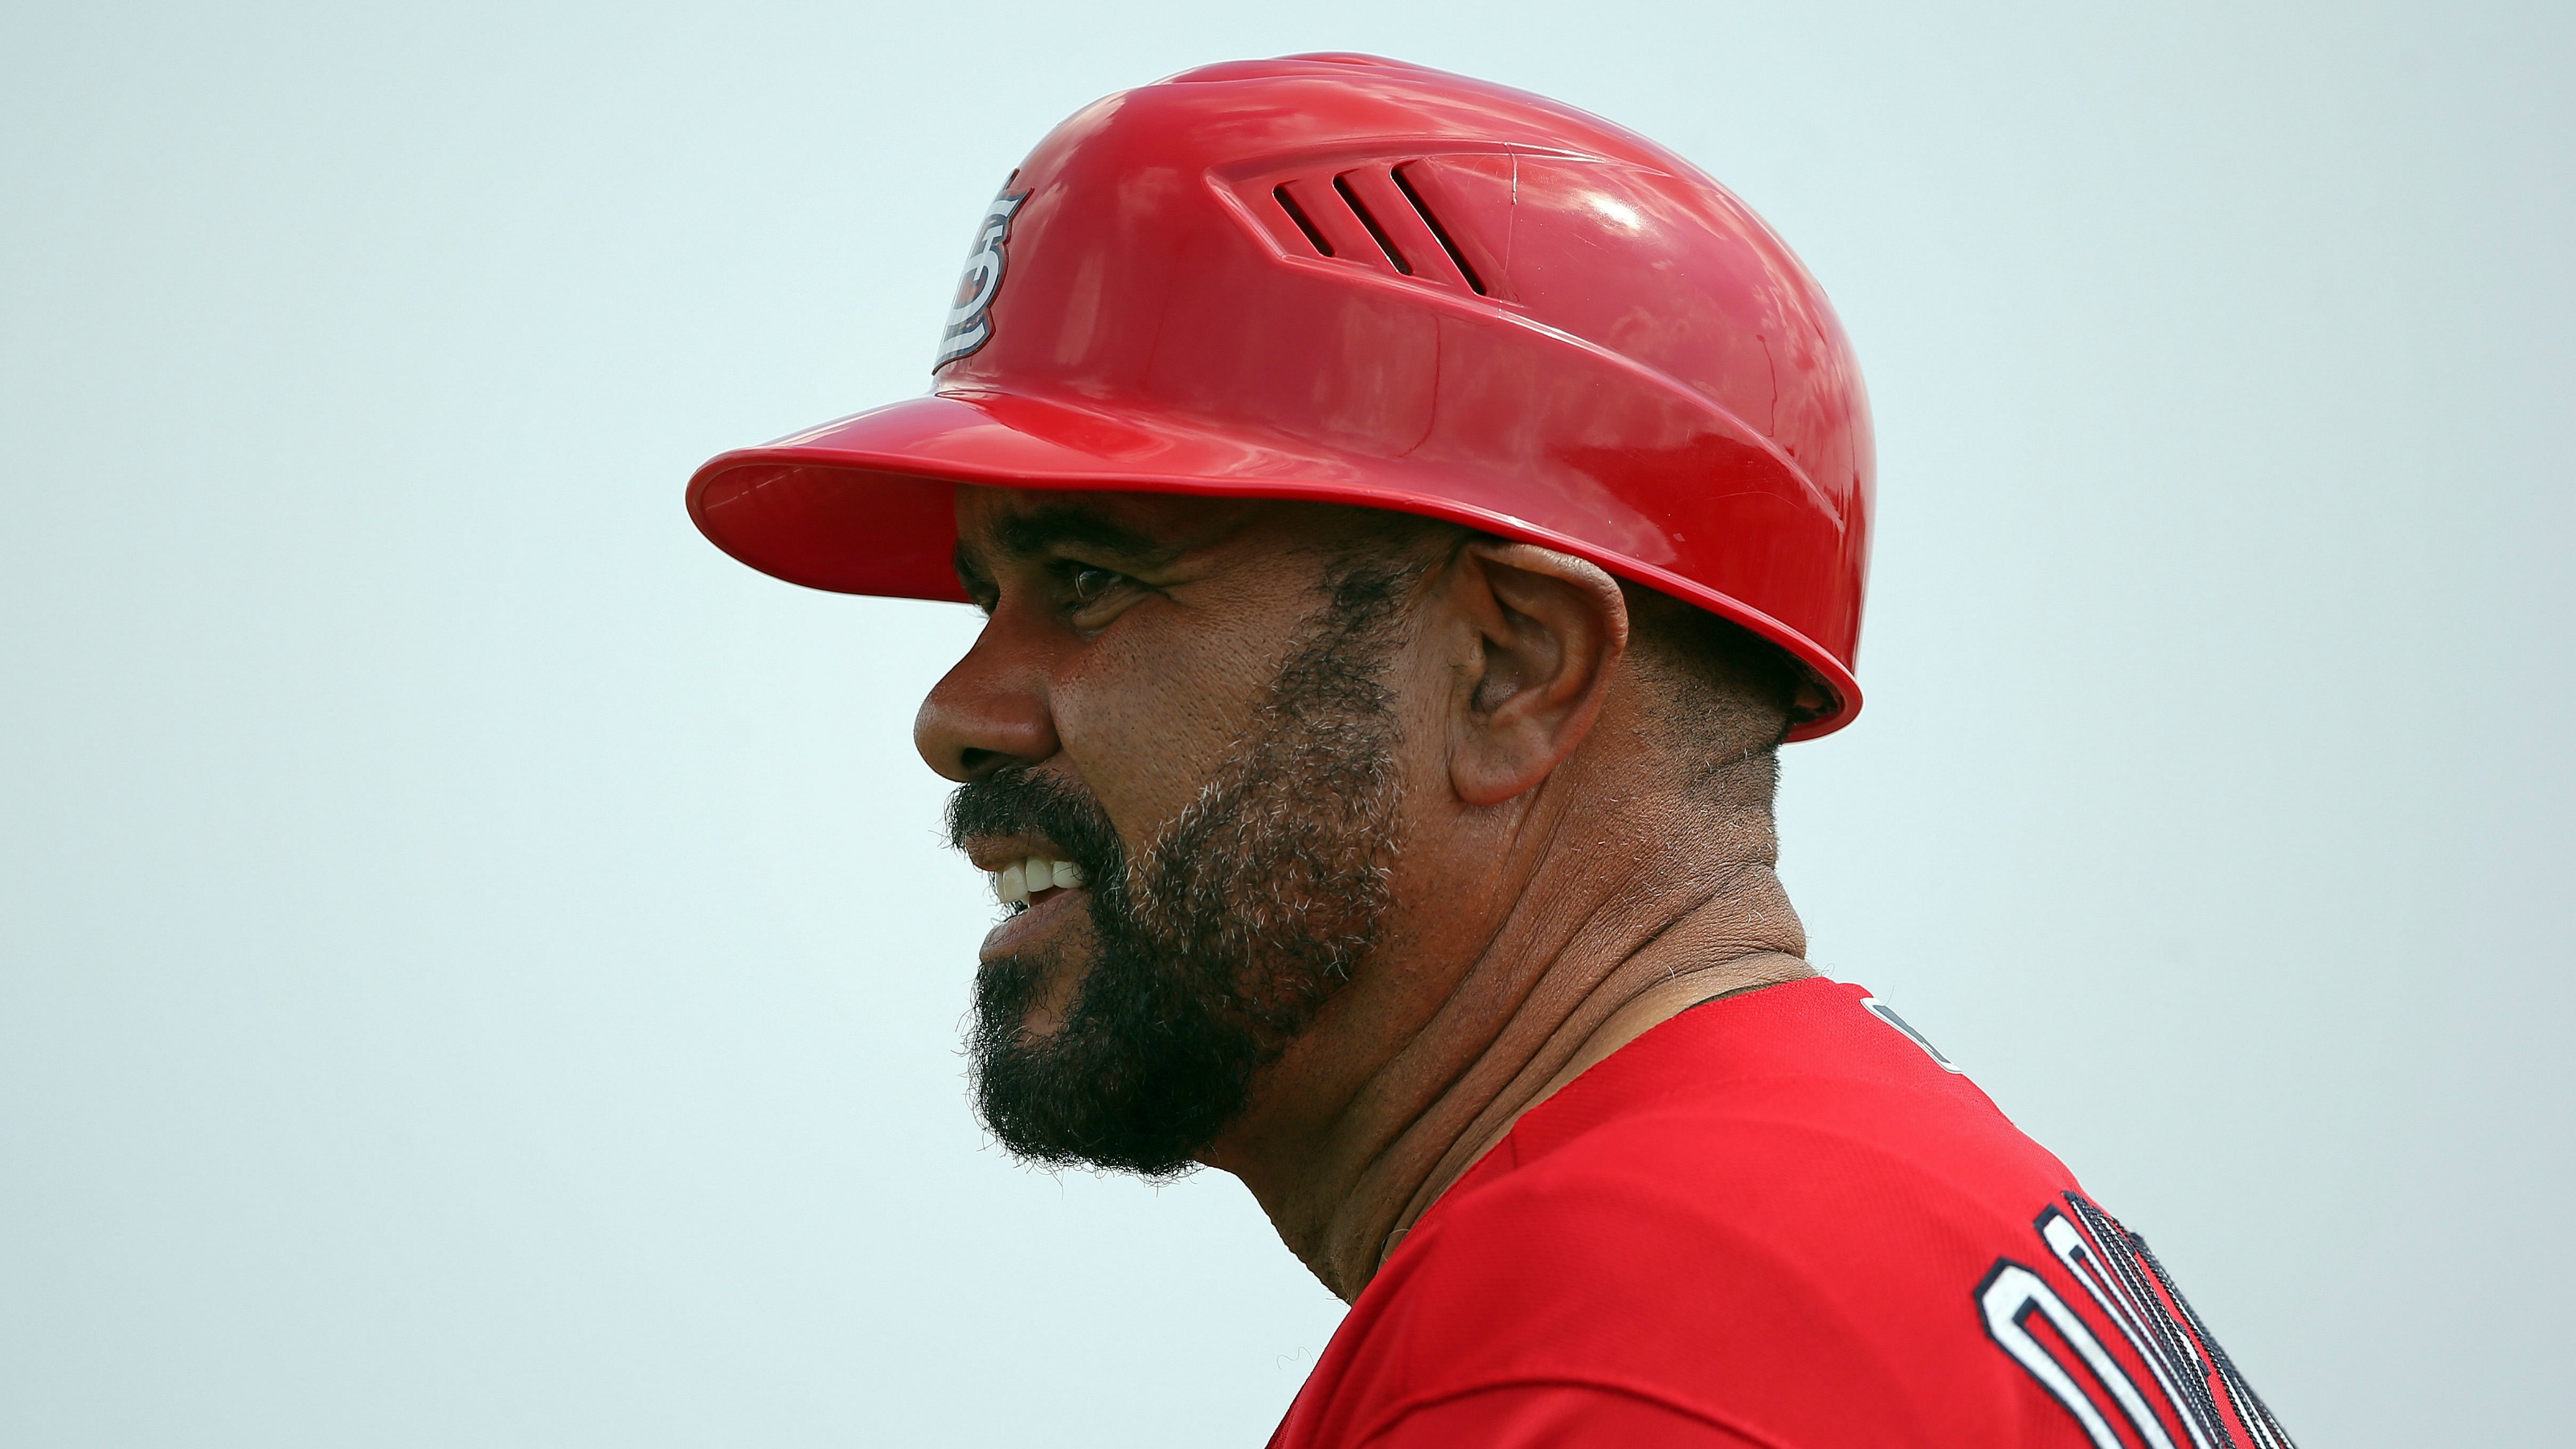 www.speedy25.com | Oquendo to return as 3rd Base coach, Willie McGee joining Major League coaching staff